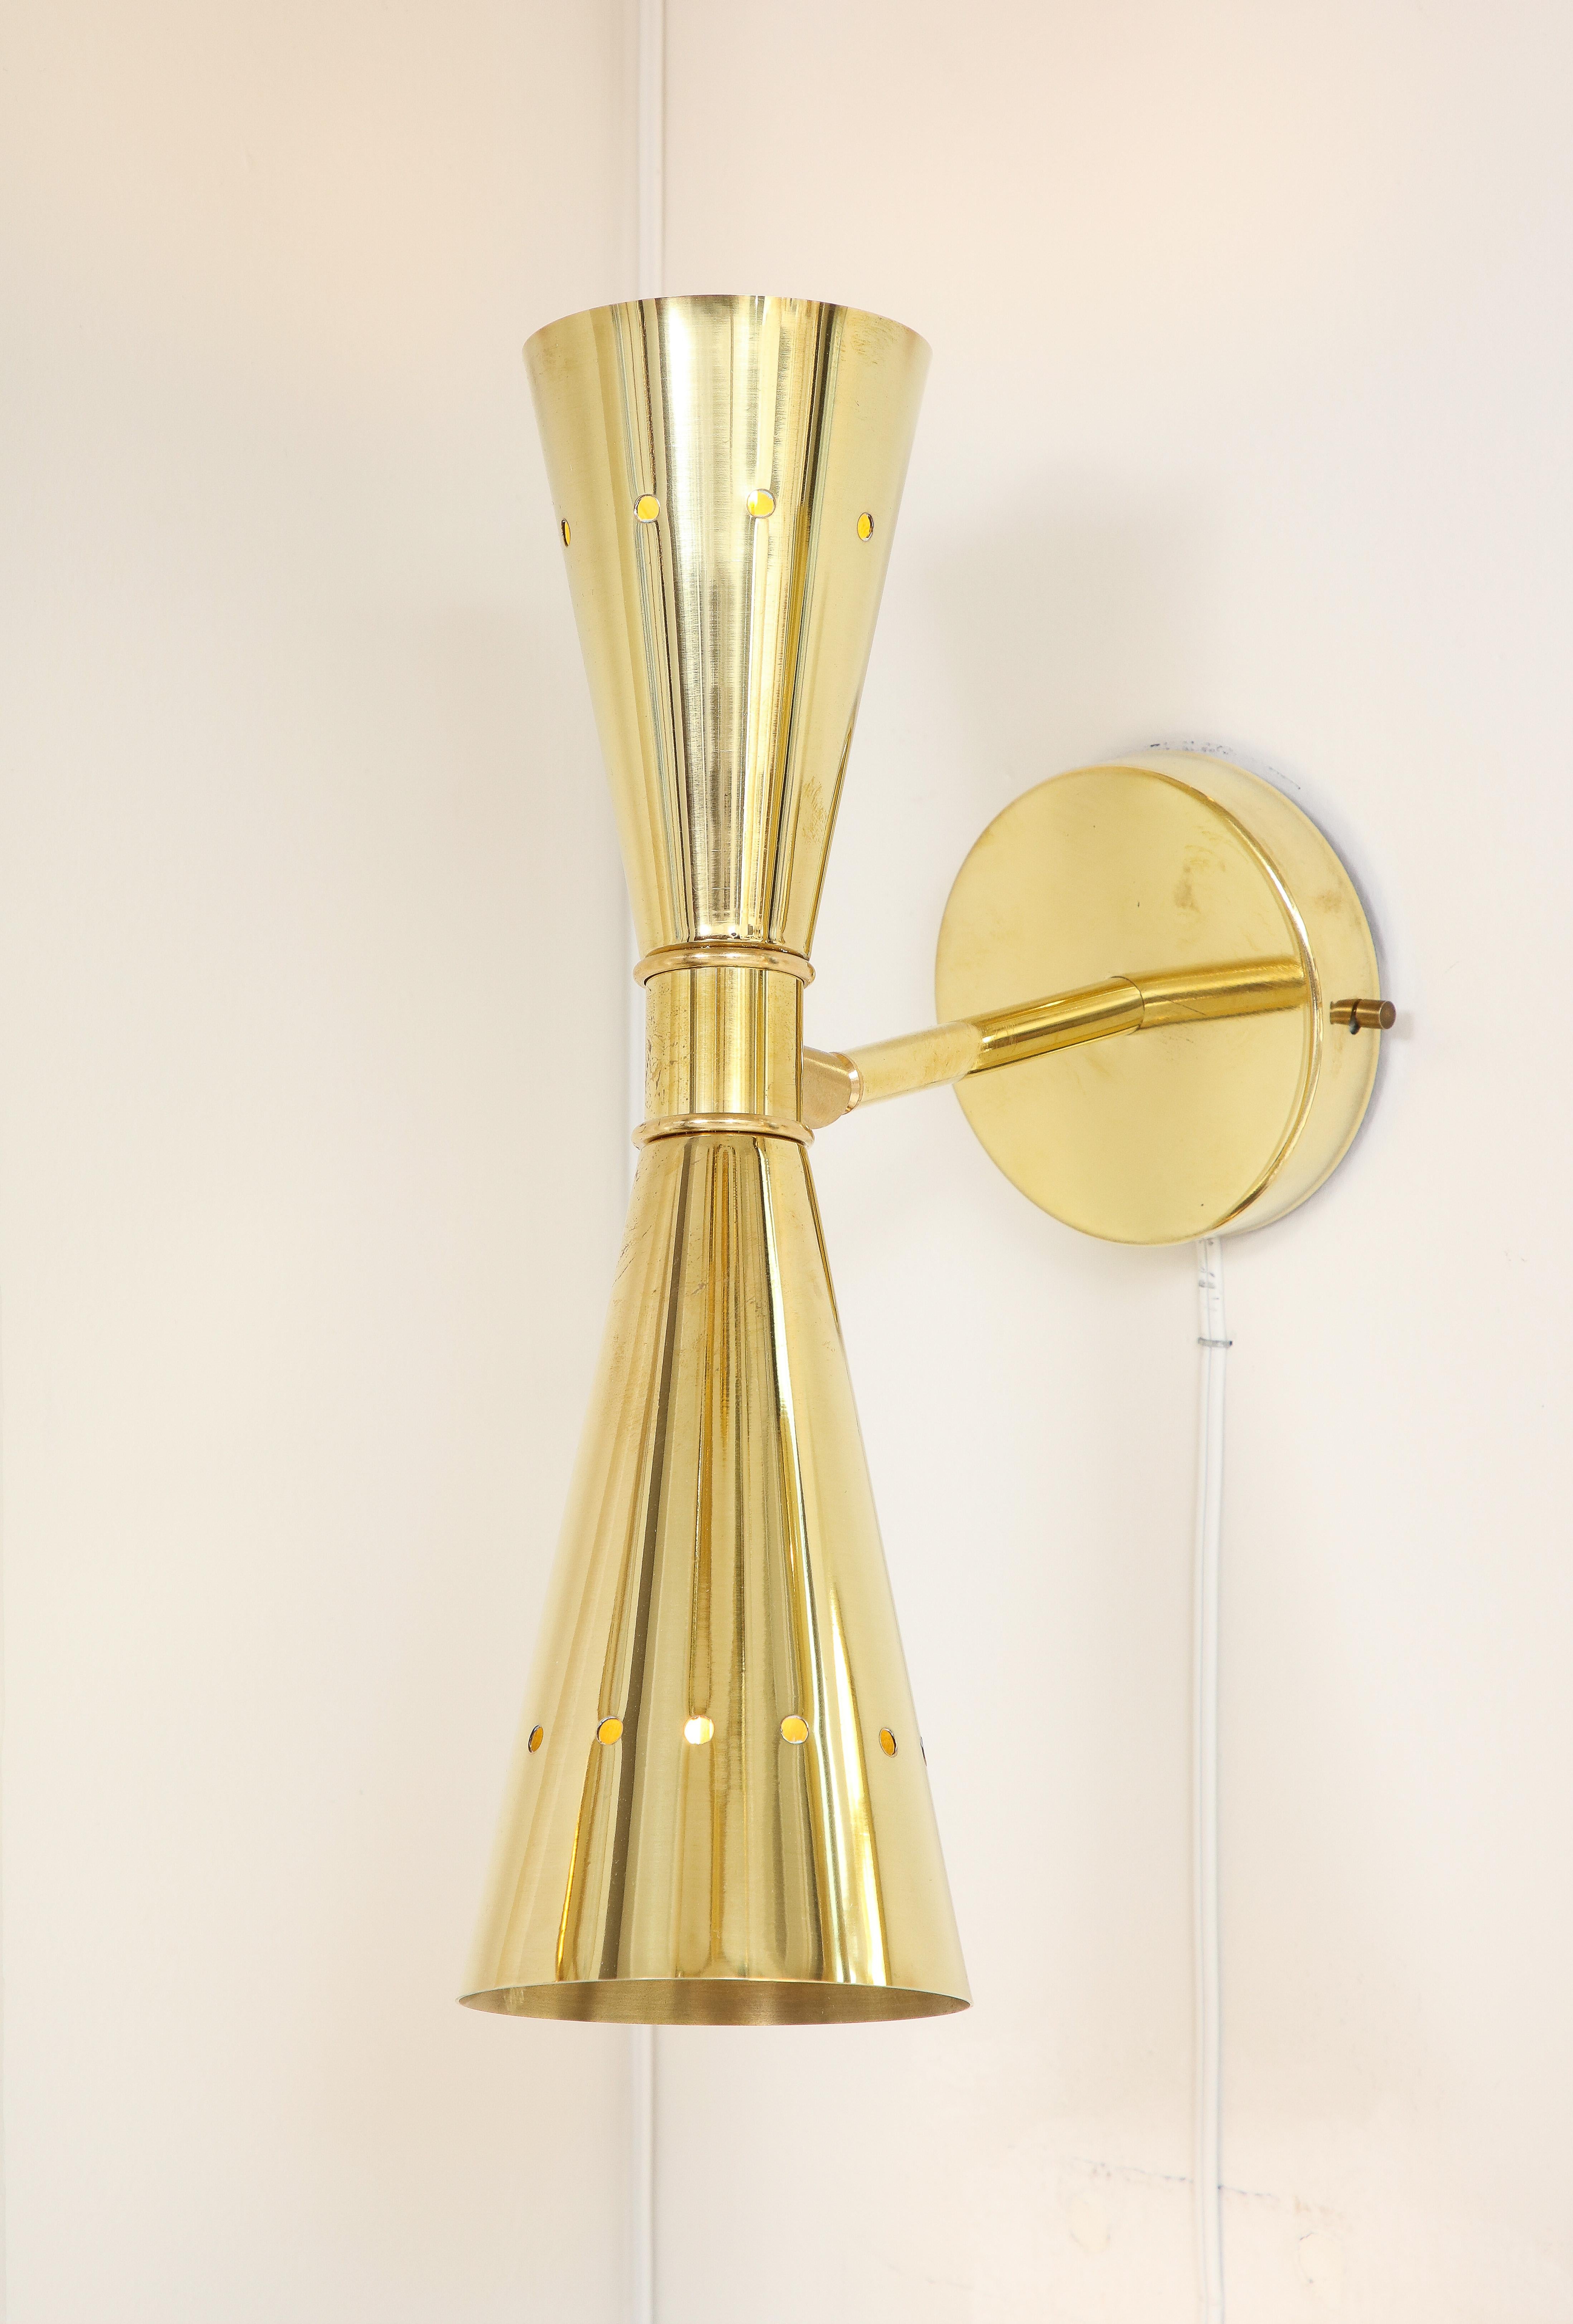 Set of Four Modernist Brass Double Cone Wall Lights or Sconces, Italy 2022 For Sale 4